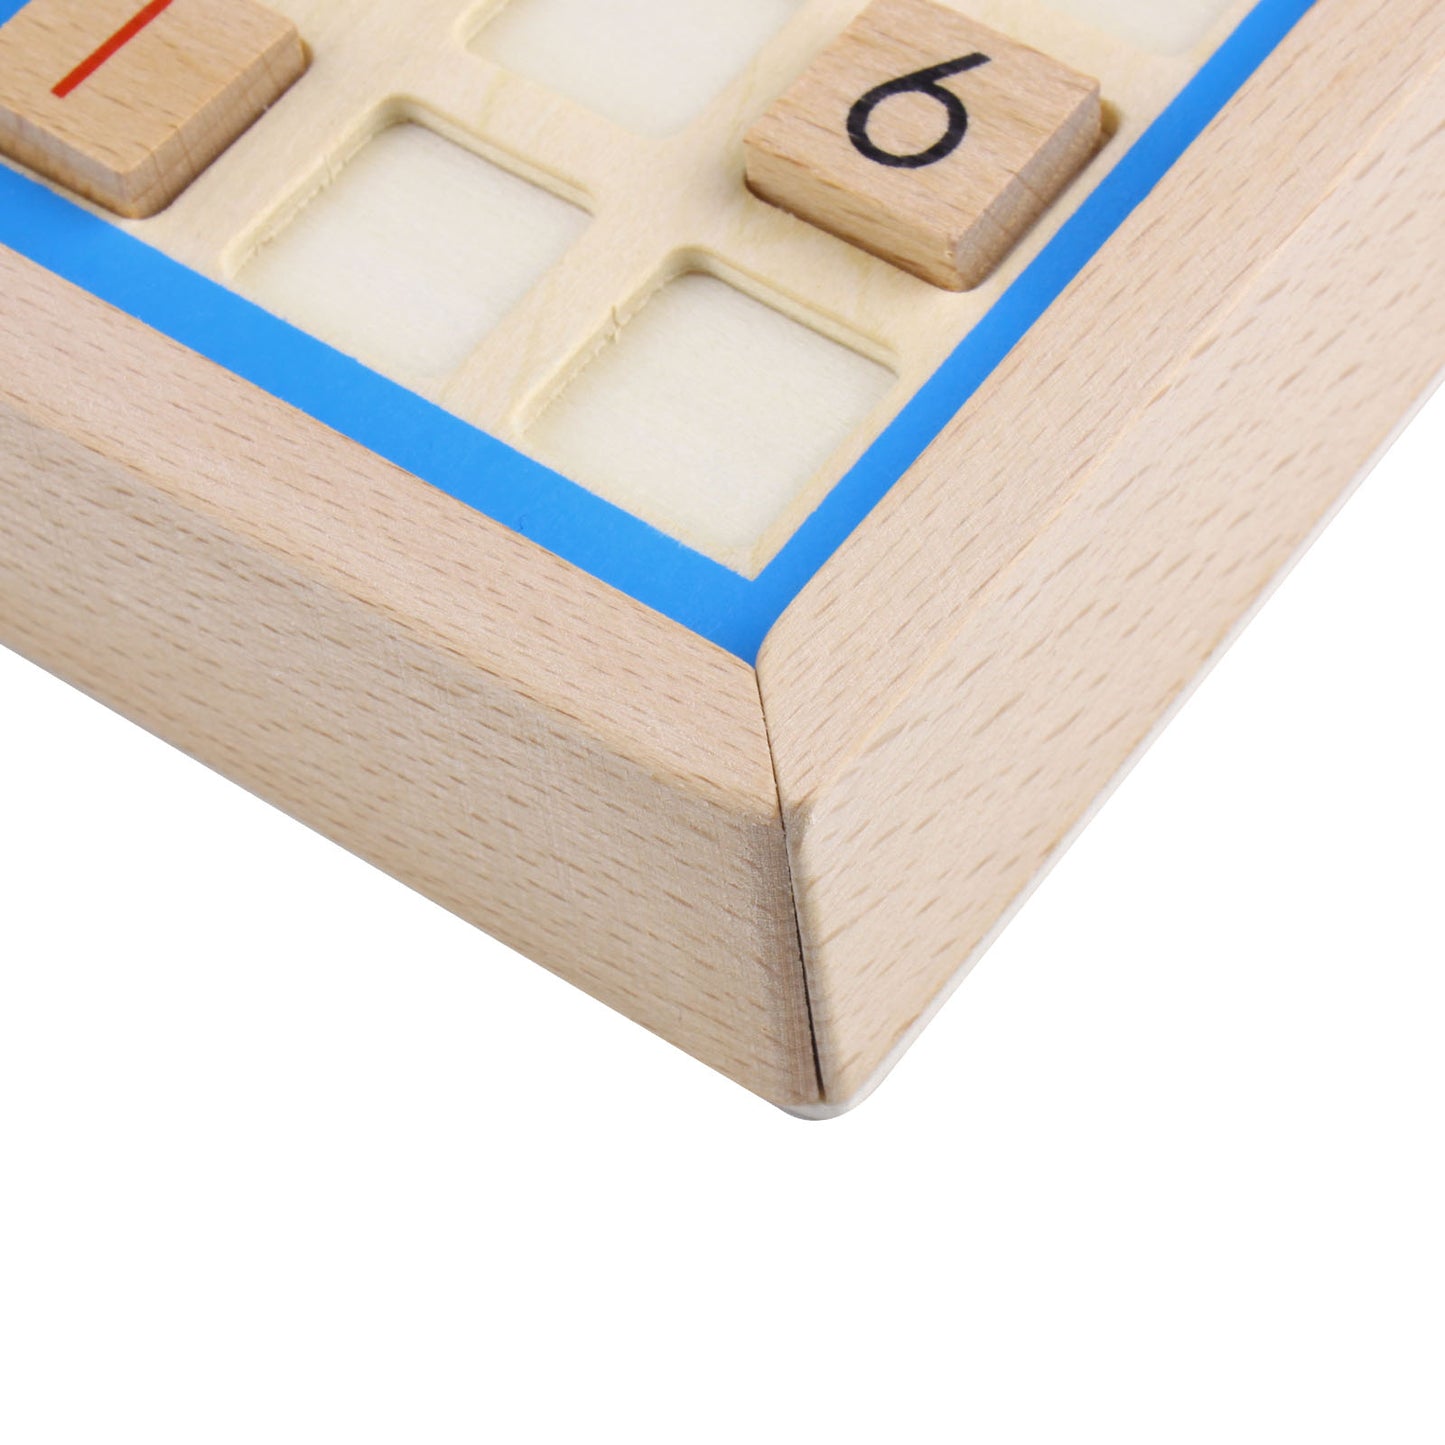 Larcele Wooden Number Puzzles Sudoku Board Games SD-02